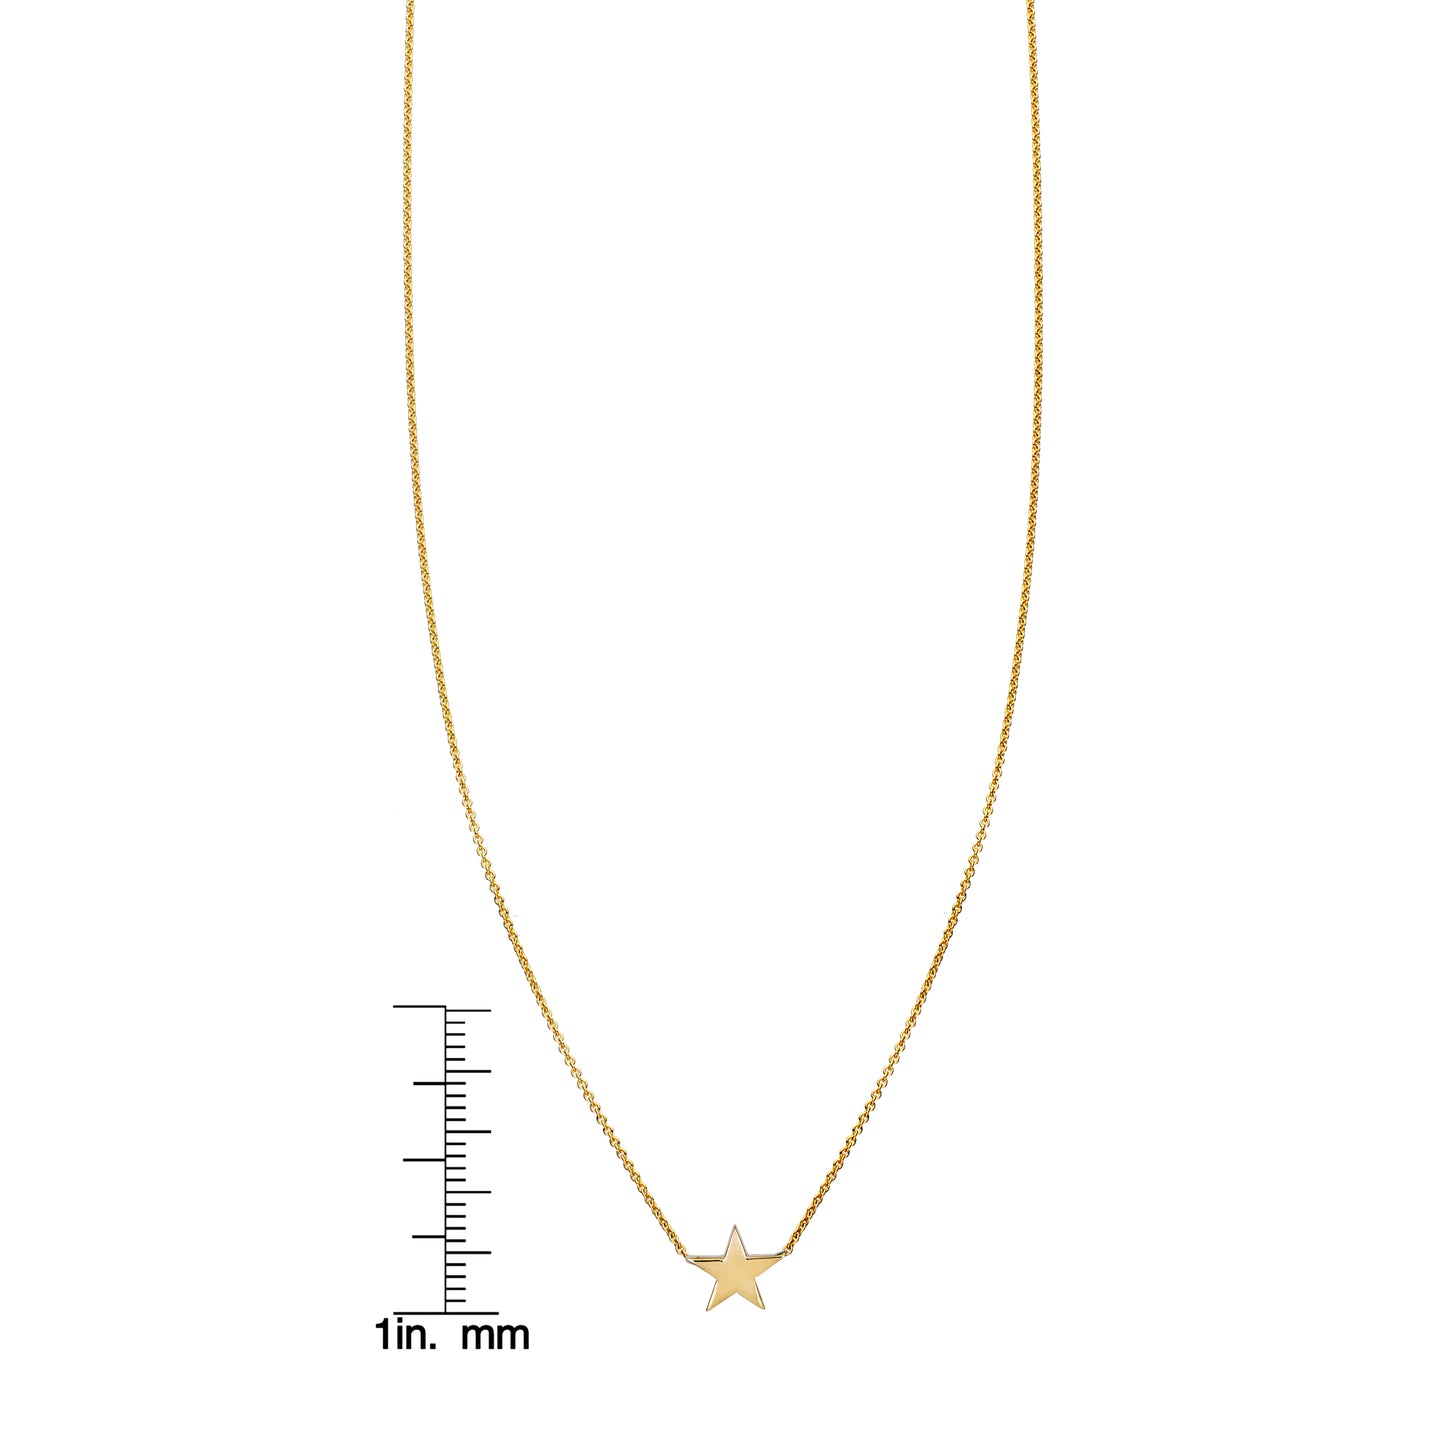 large gold star necklace with ruler